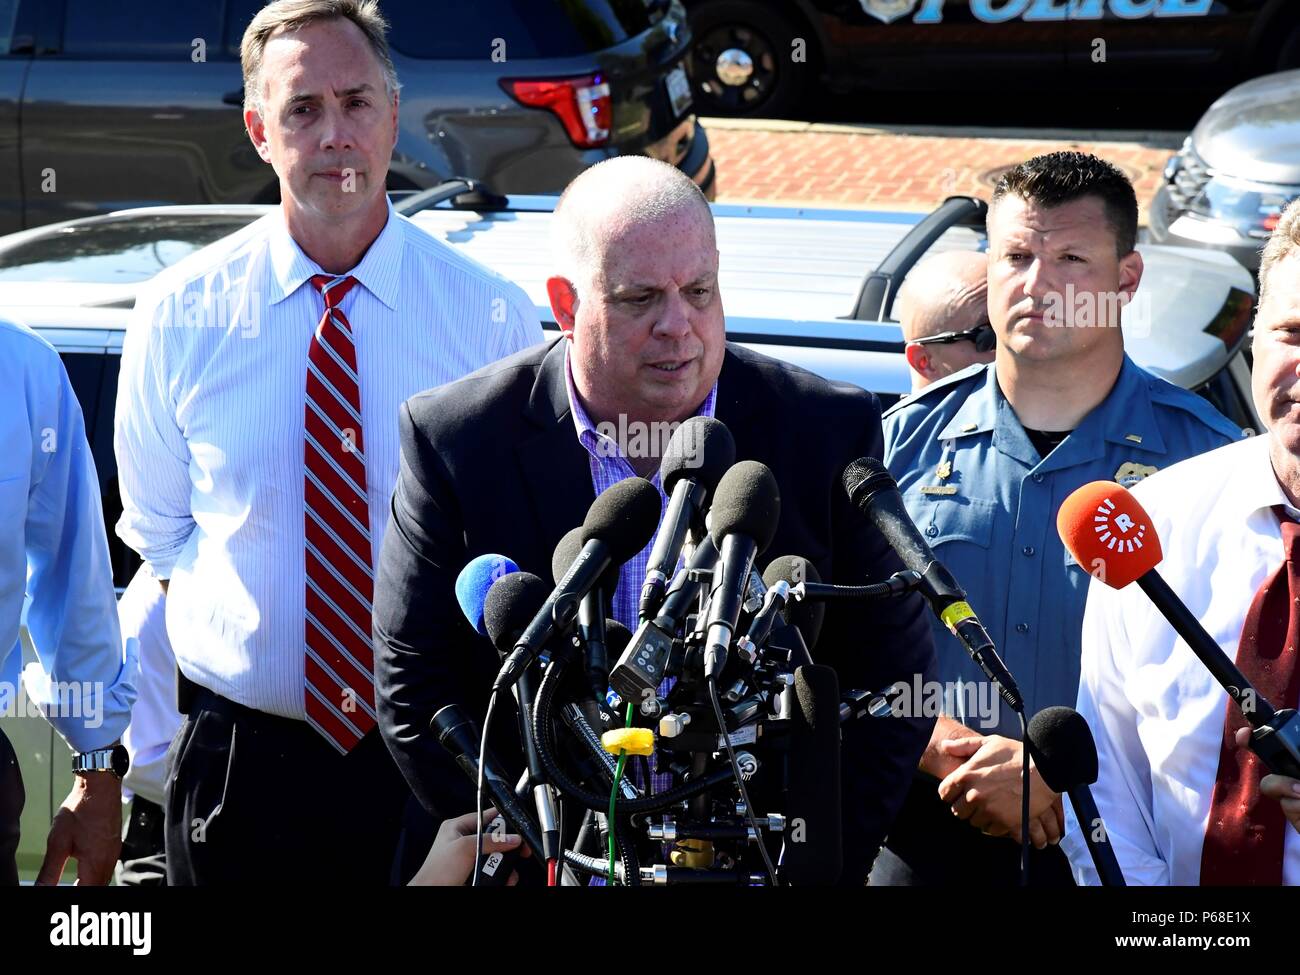 Annapolis, USA. 28th June, 2018. Maryland Governor Larry Hogan (C) speaks to the media near the scene of a mass shooting in Annapolis, the capital city of eastern U.S. state Maryland, on June 28, 2018. Five people were killed on Thursday afternoon with several 'gravely injured' in a mass shooting at local daily newspaper Capital Gazette in Annapolis, police said. Credit: Yang Chenglin/Xinhua/Alamy Live News Stock Photo